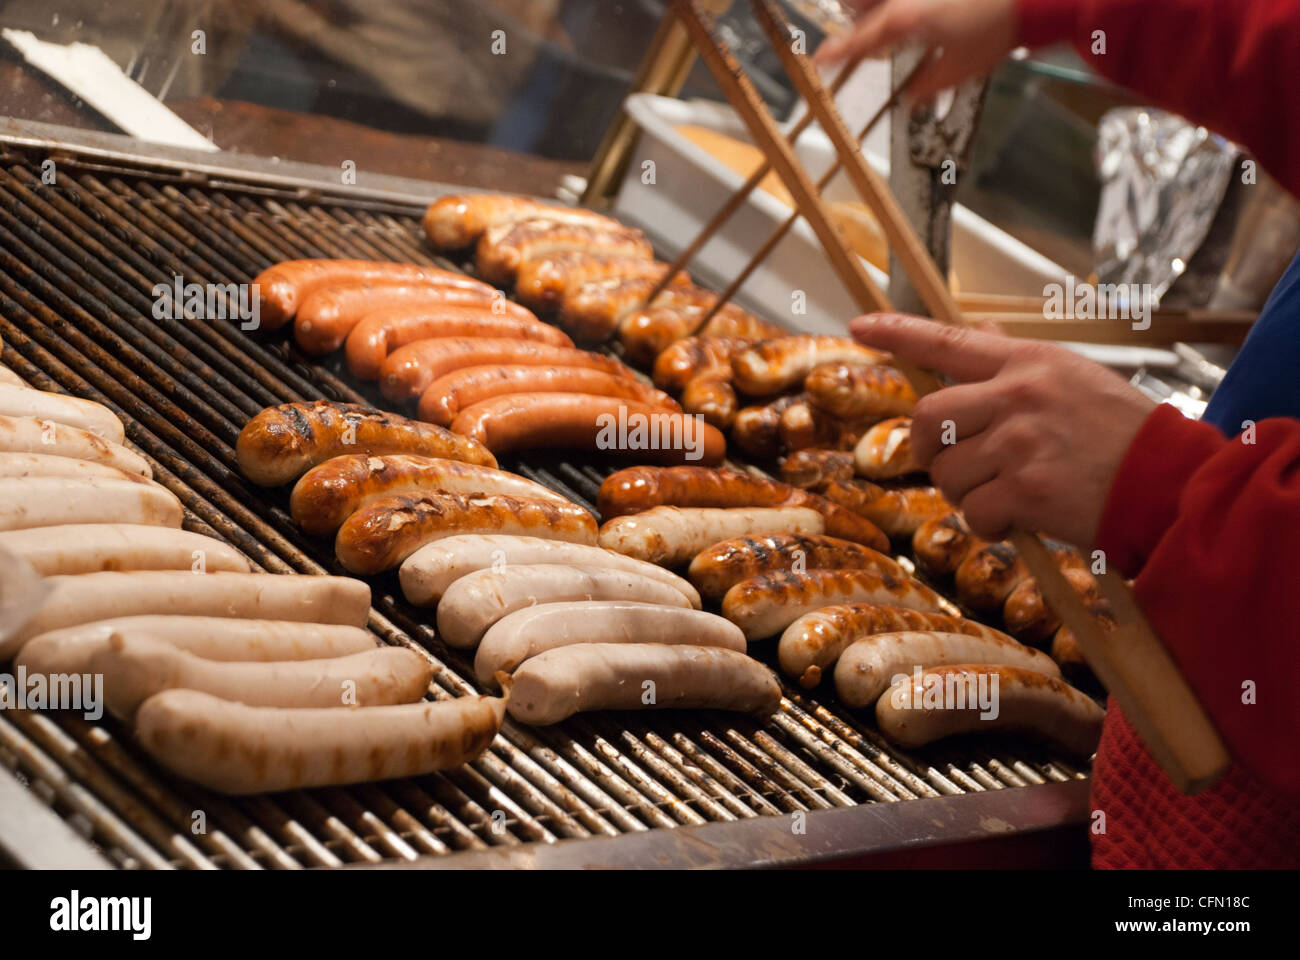 Bratwurst (German Sausage) cooking on a grill in a Christmas Market Stock Photo